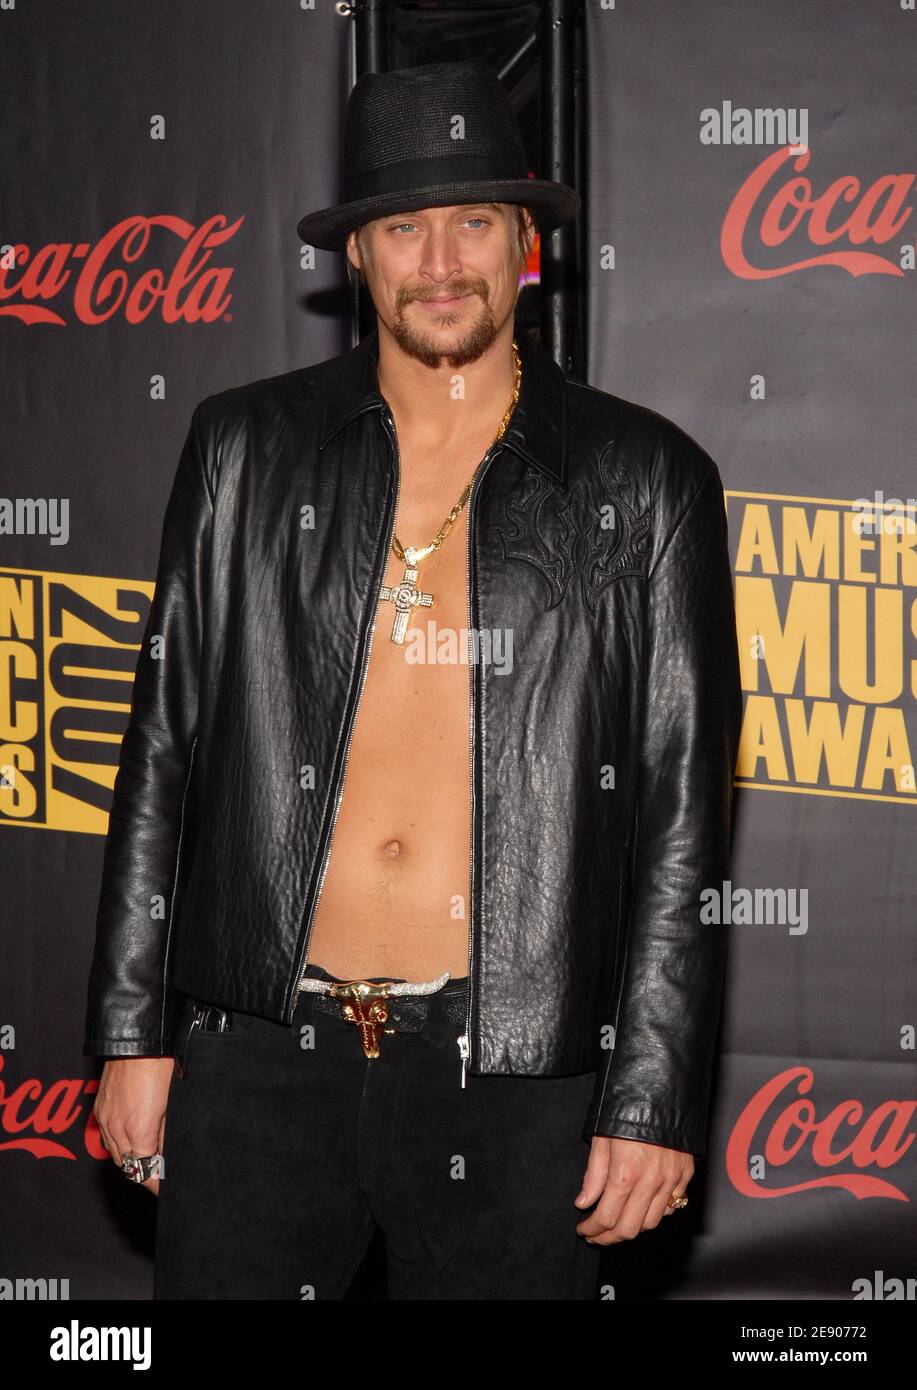 Kid Rock attends the 2007 American Music Awards, held at the Nokia Theatre, in downtown Los Angeles, CA, USA on November 18, 2007. Photo by Lionel Hahn/ABACAPRESS.COM Stock Photo